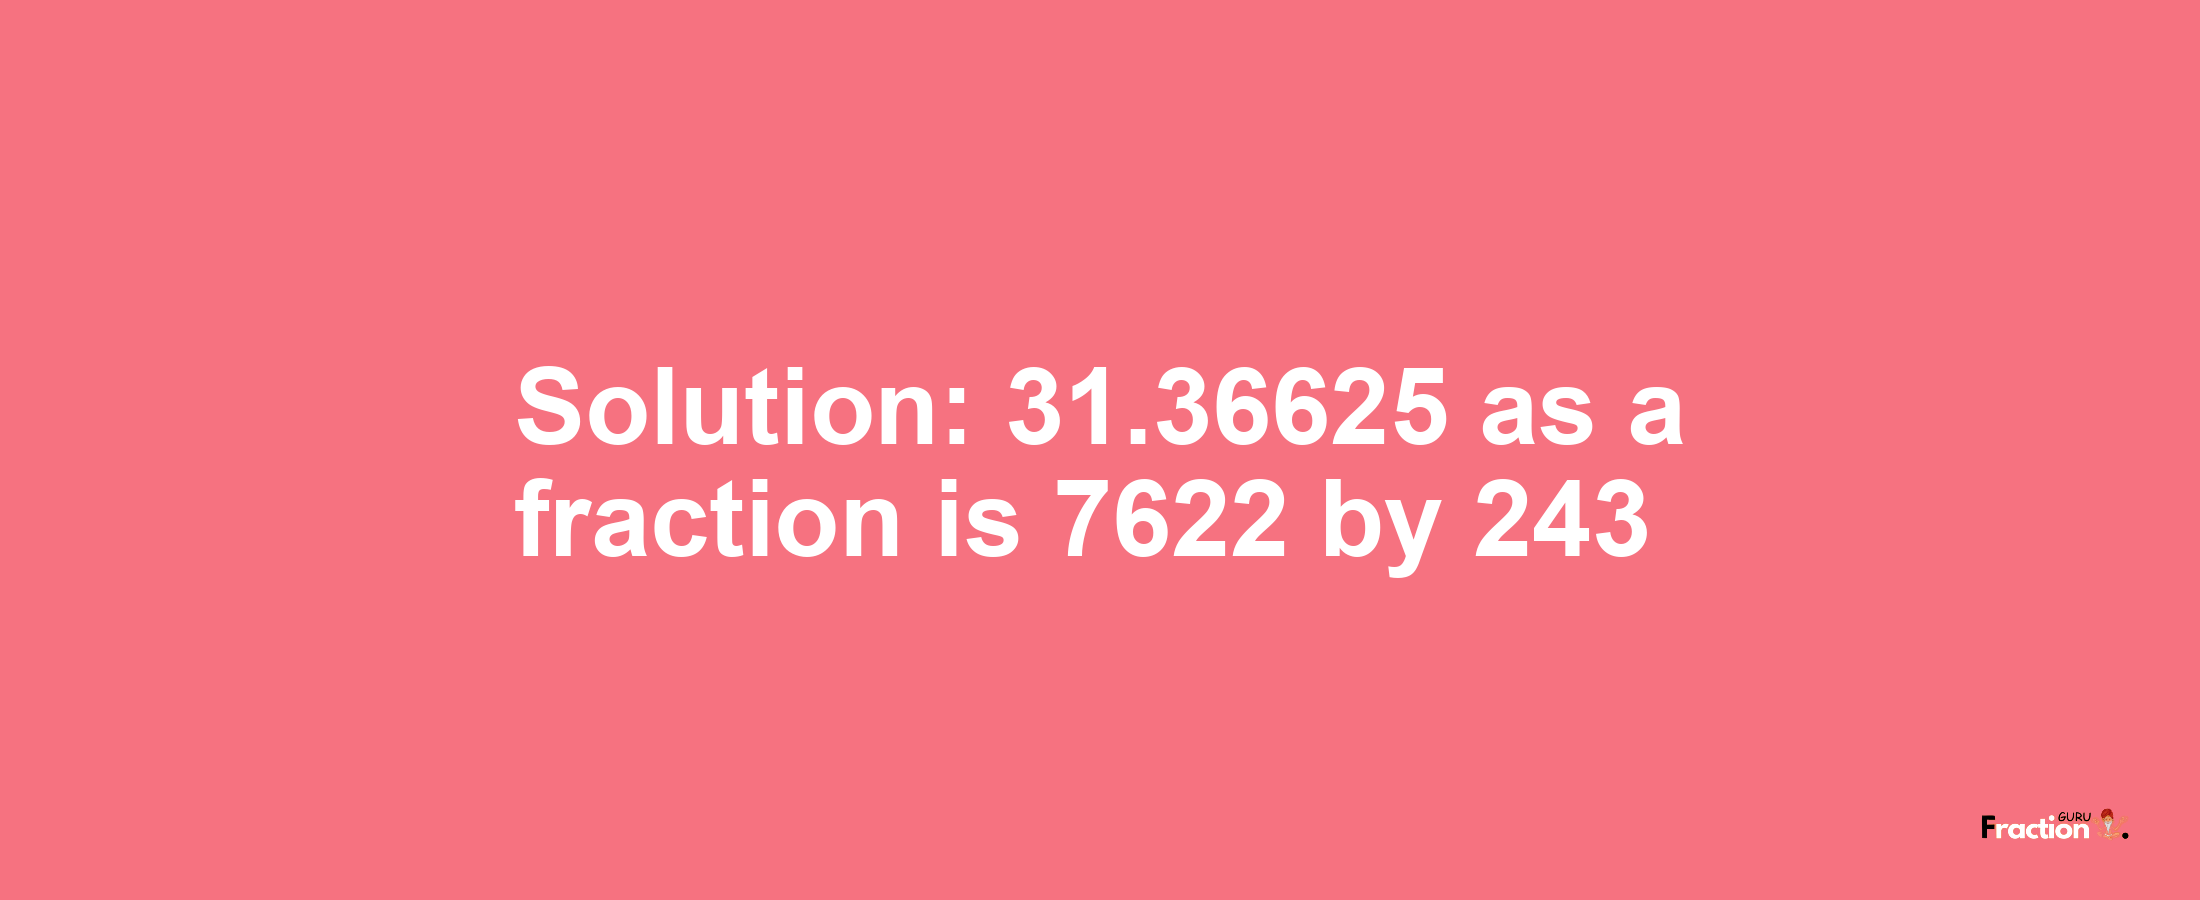 Solution:31.36625 as a fraction is 7622/243